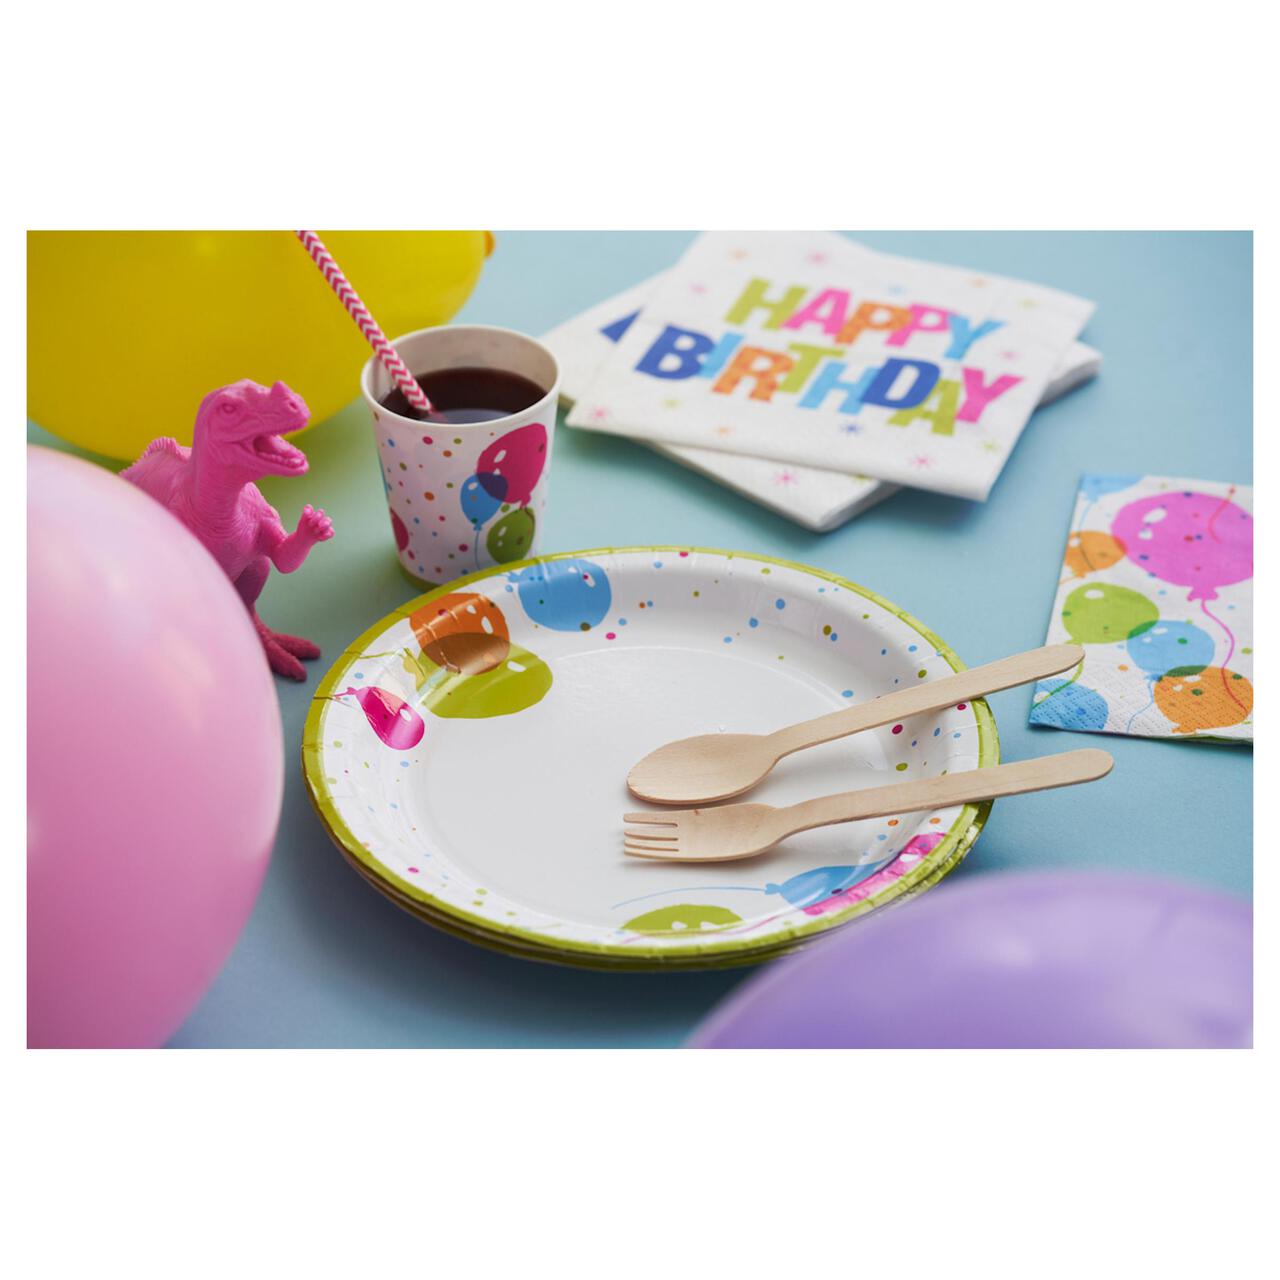 Bio Balloons Recyclable Paper Plate 22cm 10 per pack